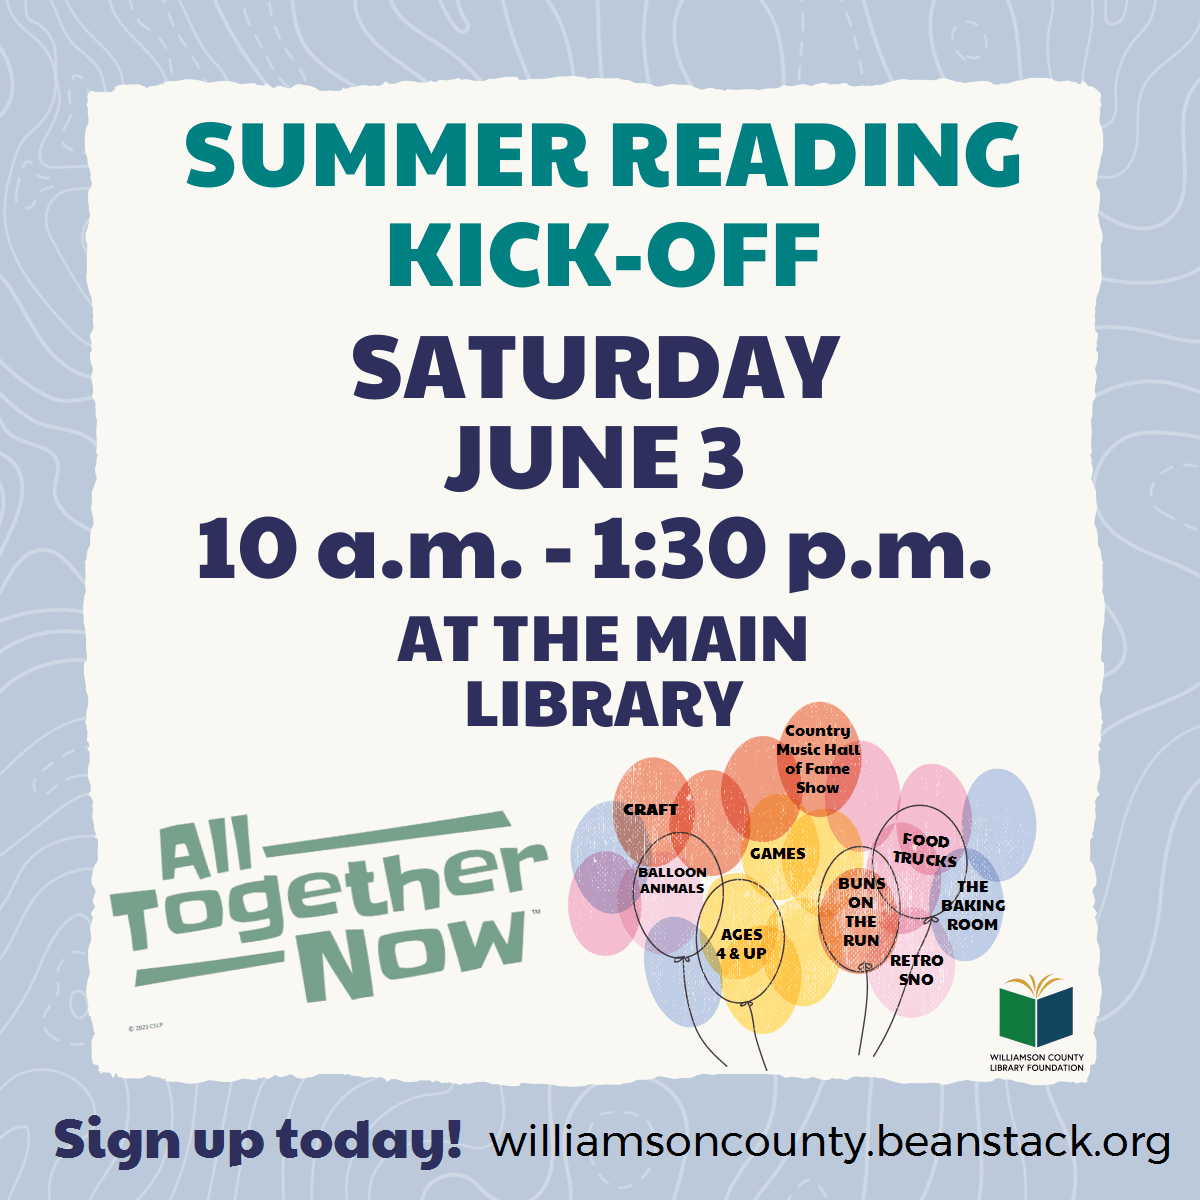 Summer Reading Kickoff Celebration in Franklin, TN, enjoy carnival-style games, food trucks, and fun activities!